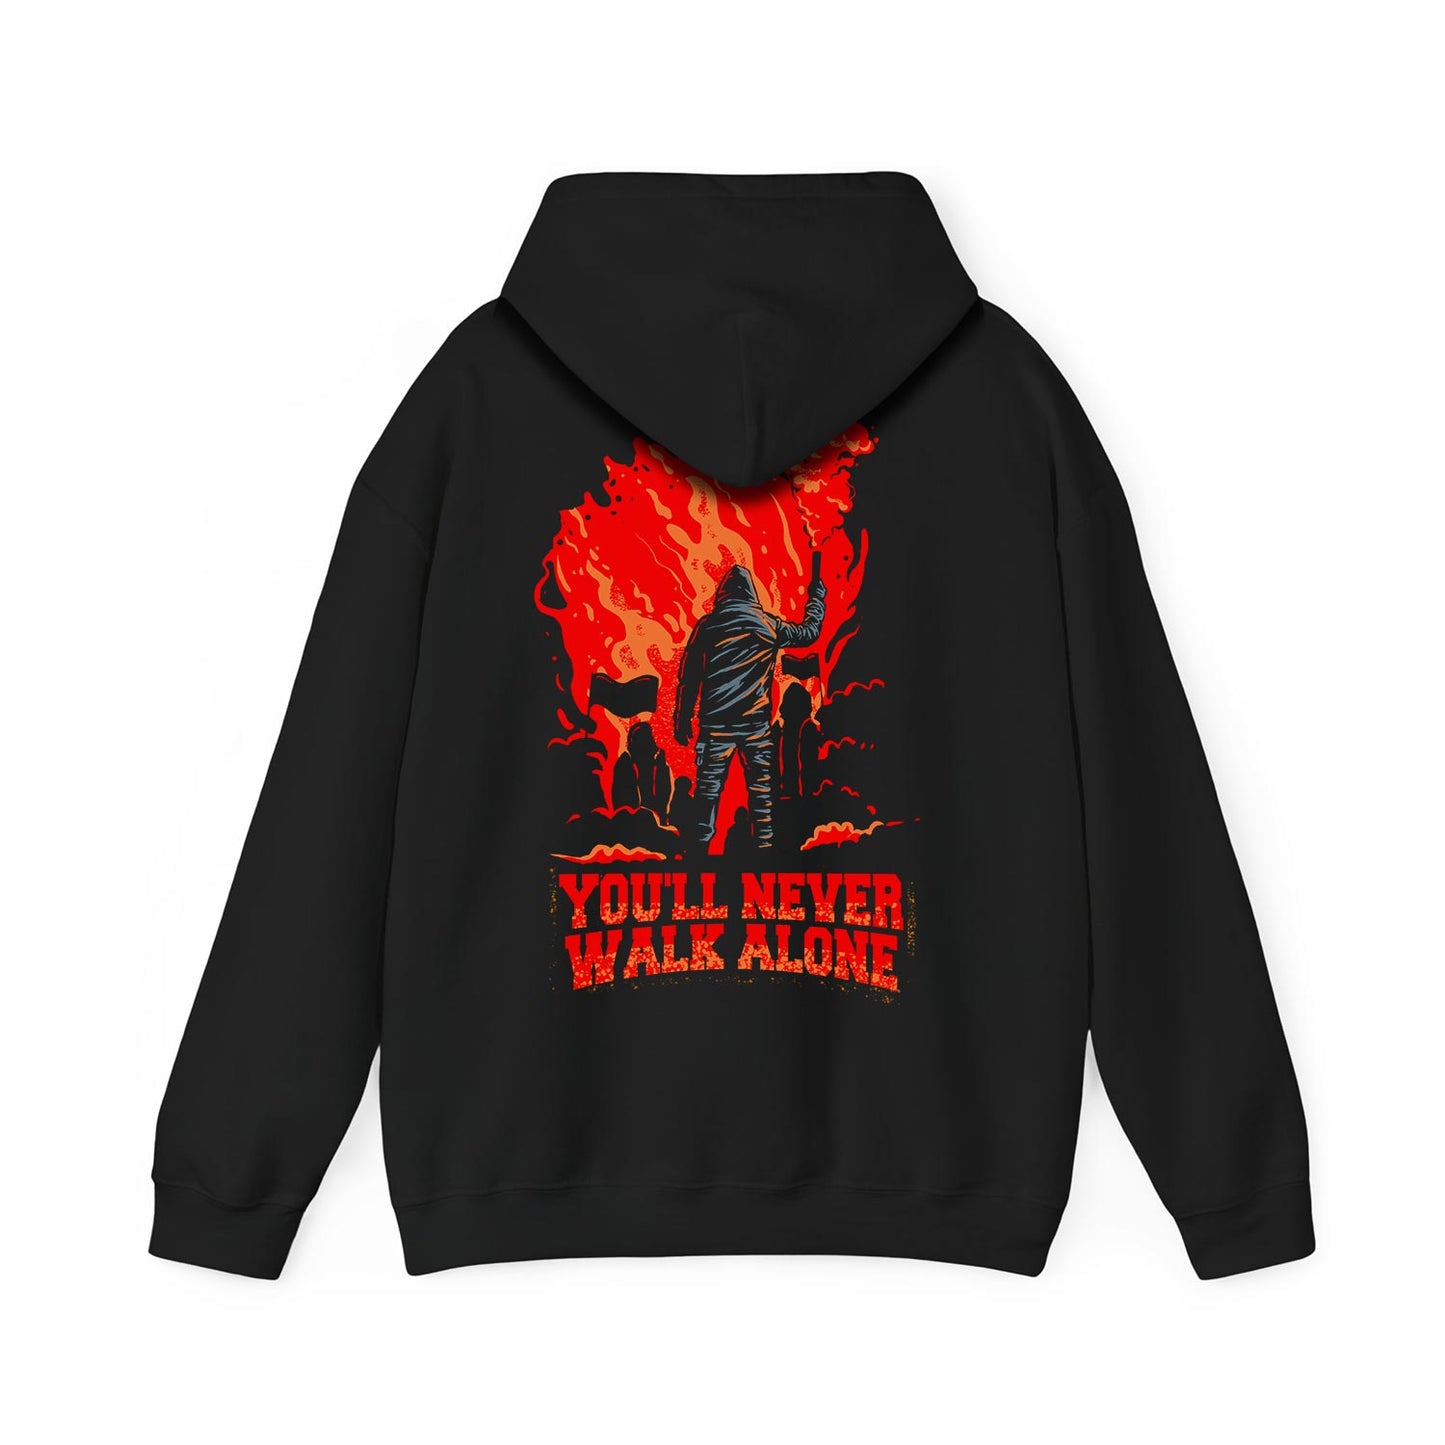 Hoodie relax - You'll never walk alone - Fakkel rood